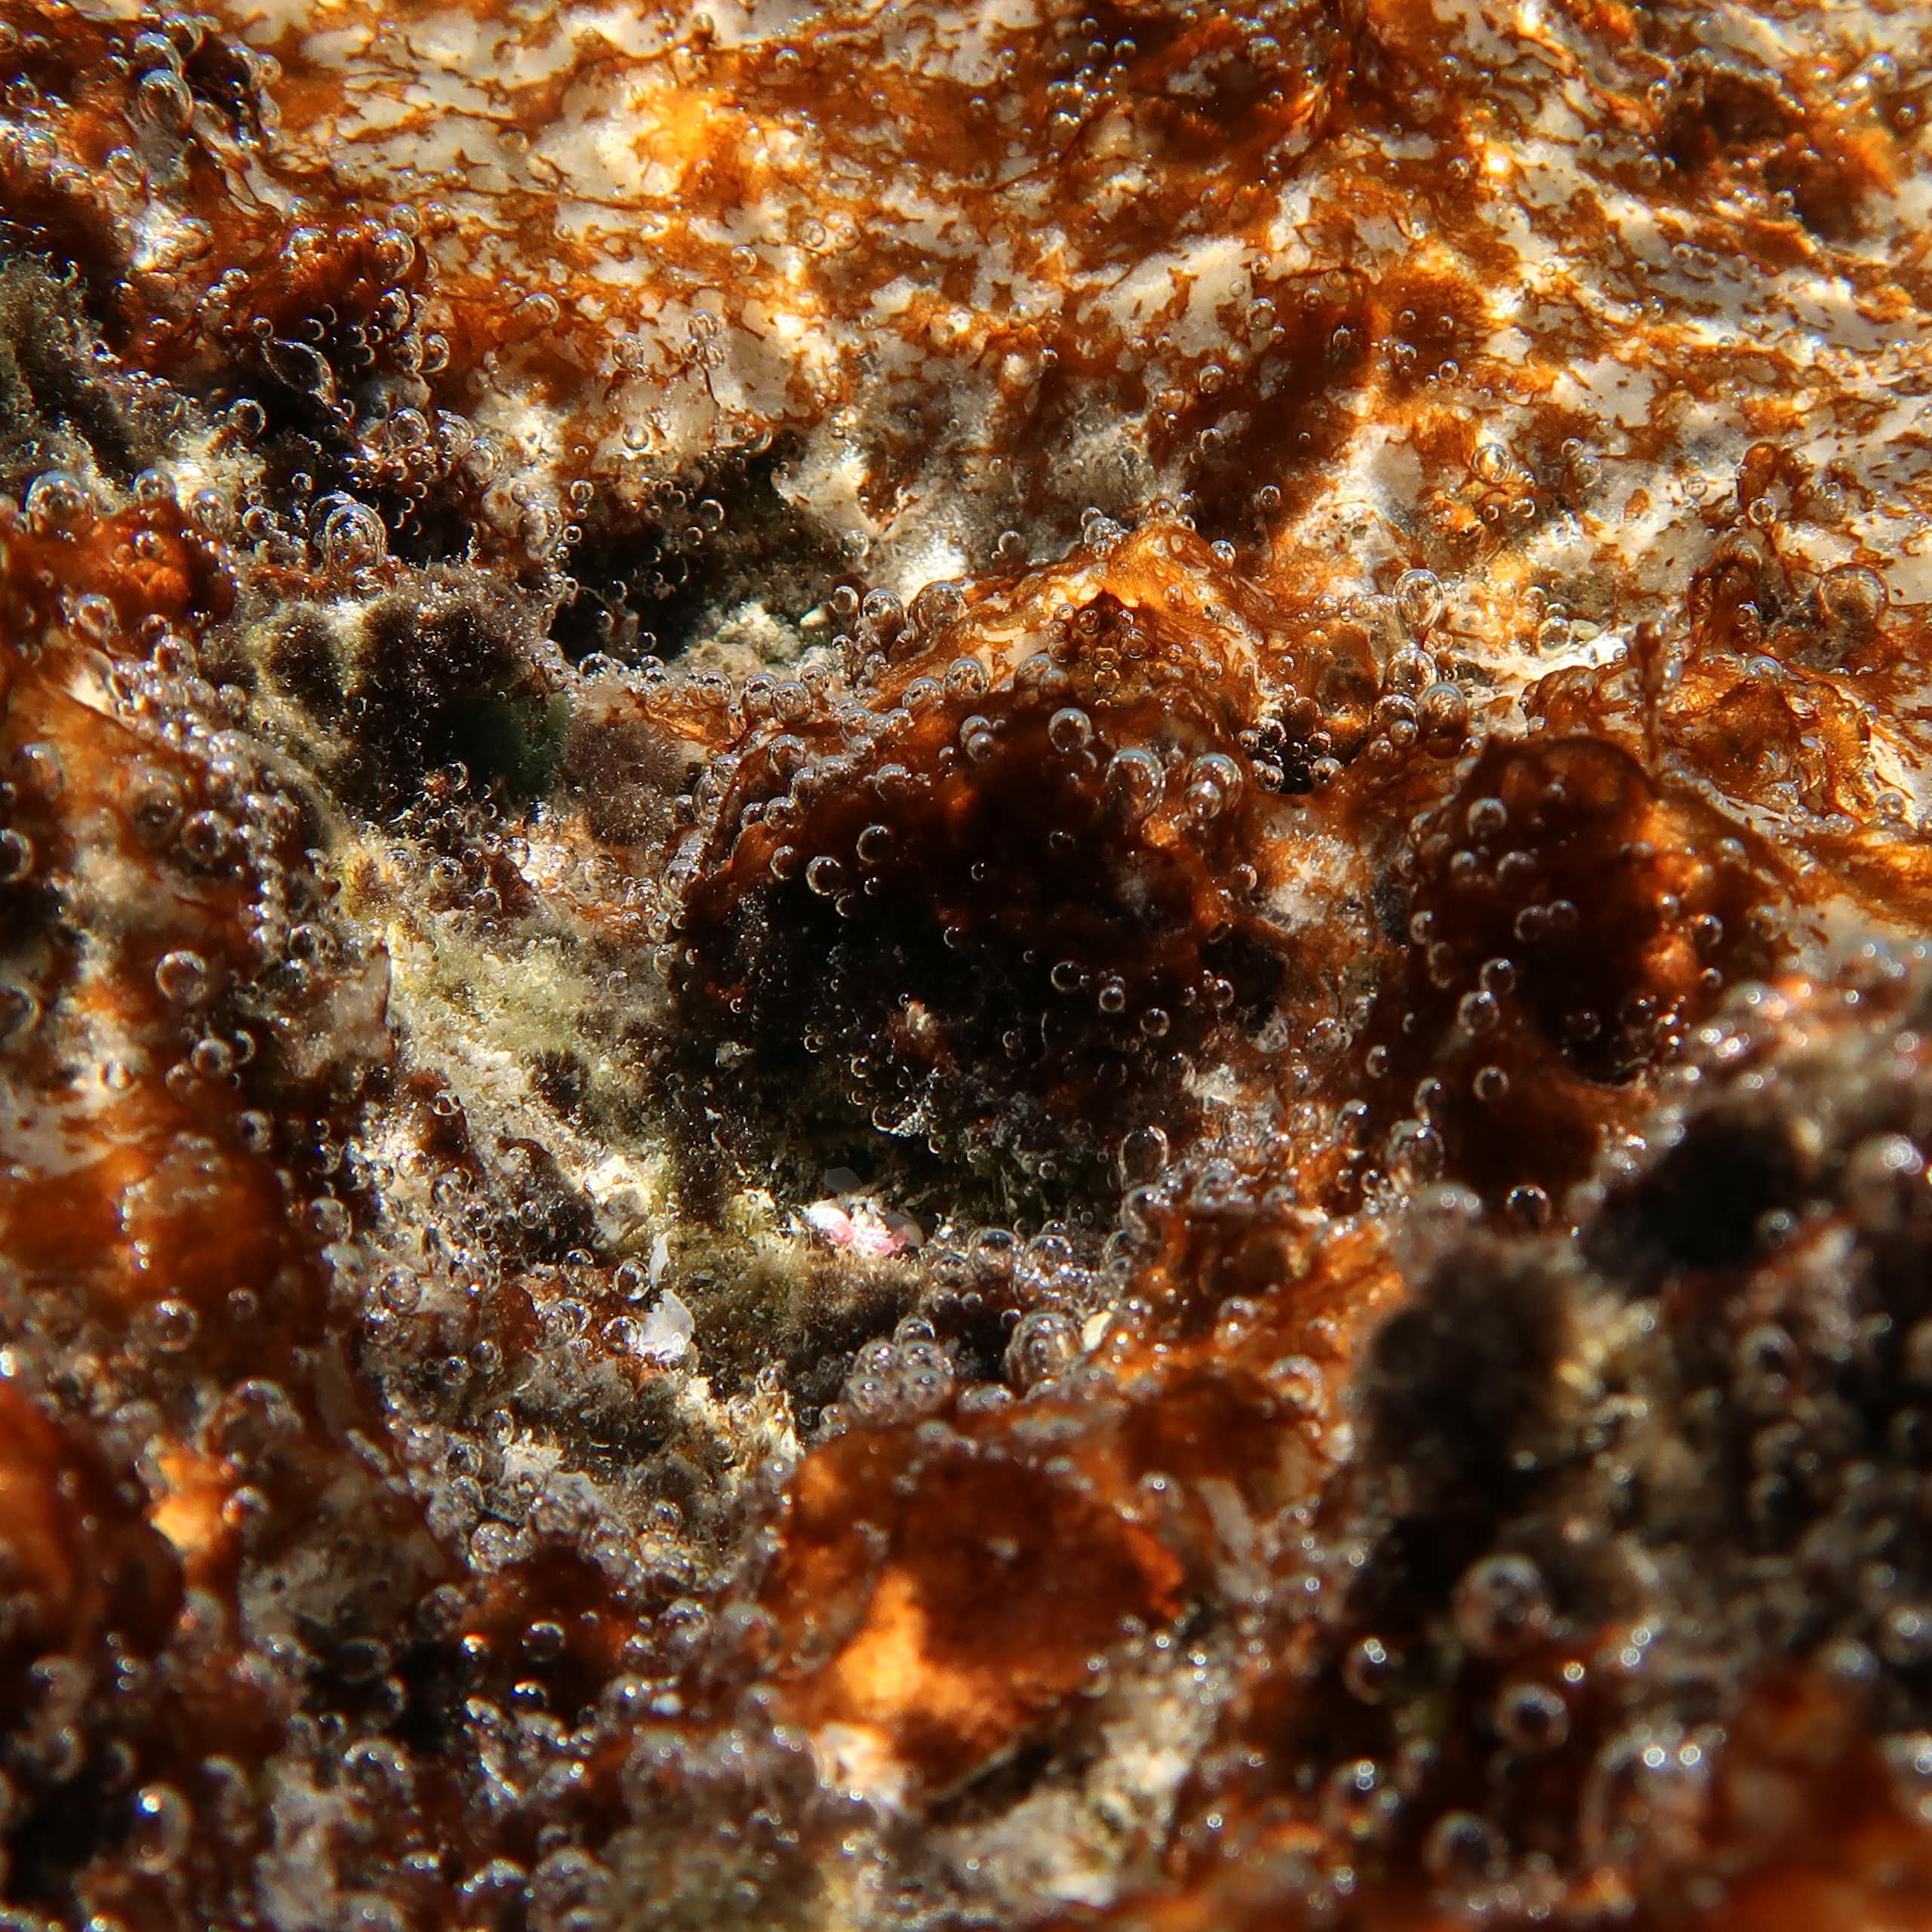 close up of brown orange algae with small bubbles of oxygen